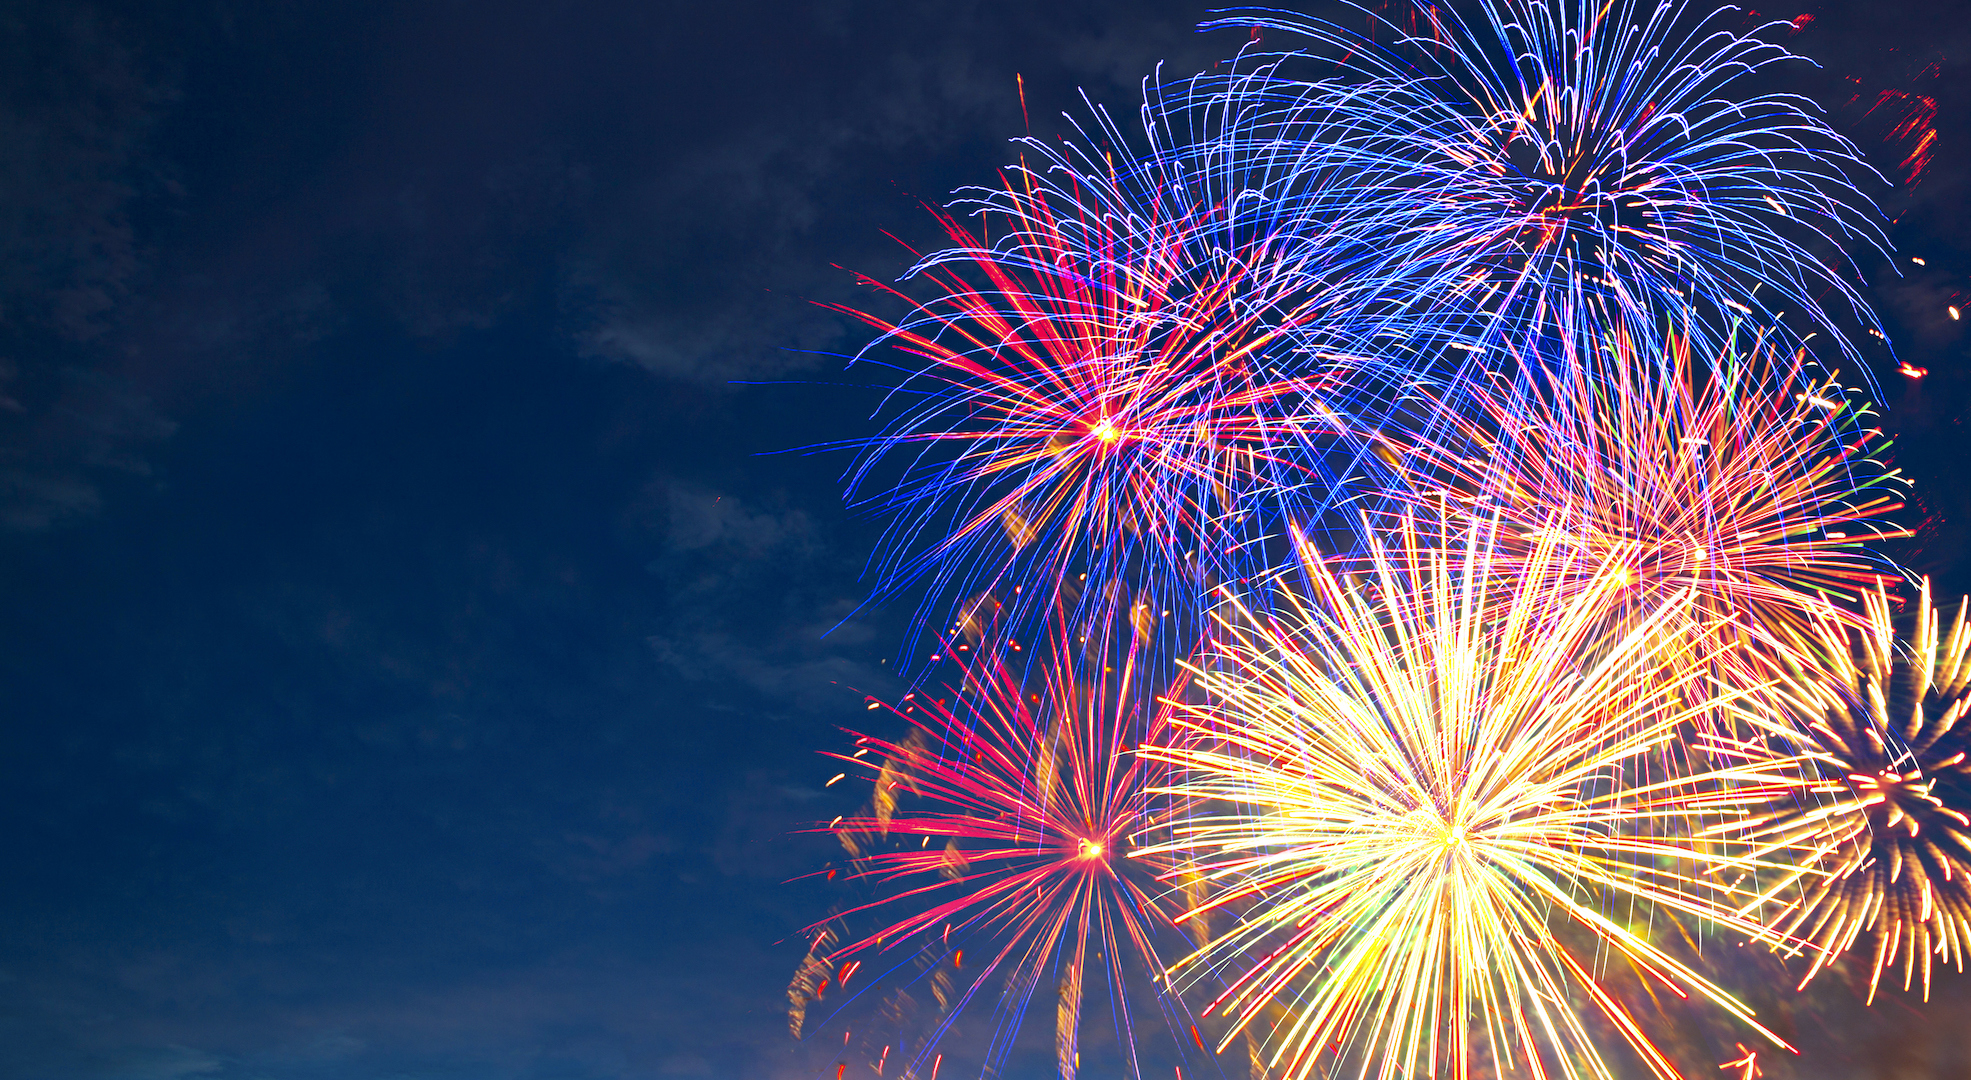 How to get the best fireworks photos!